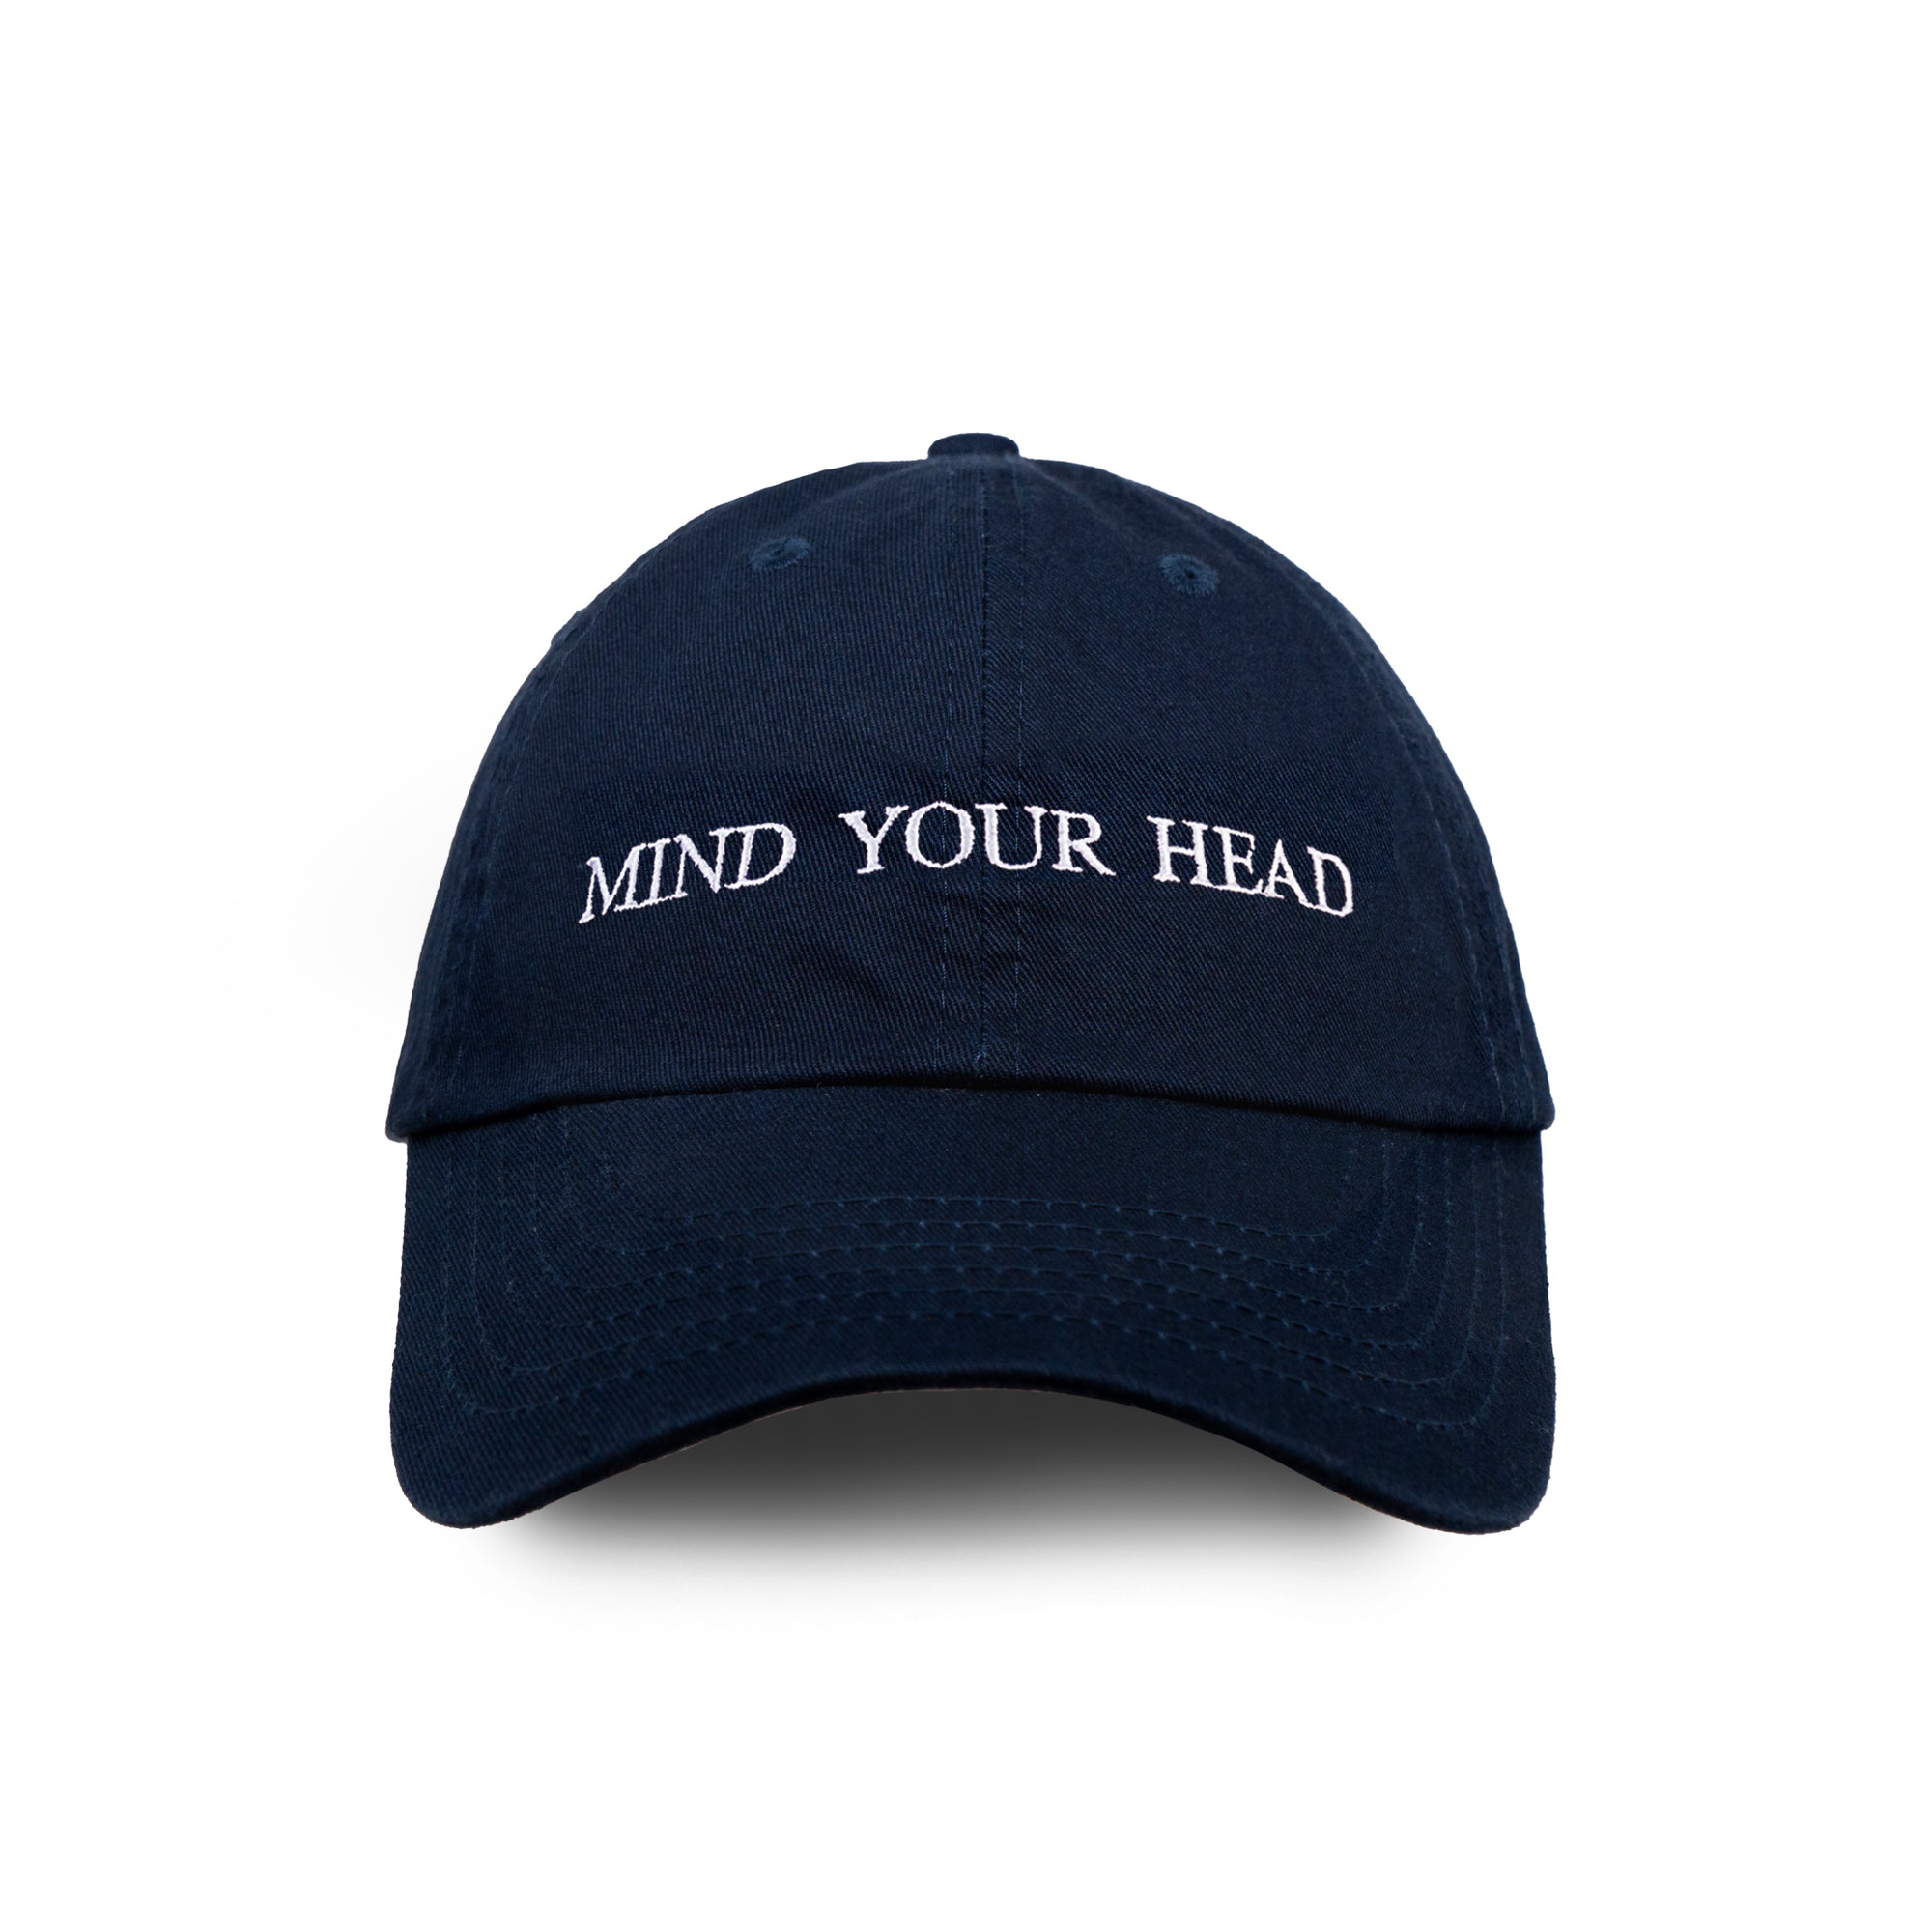 MIND YOUR HEAD